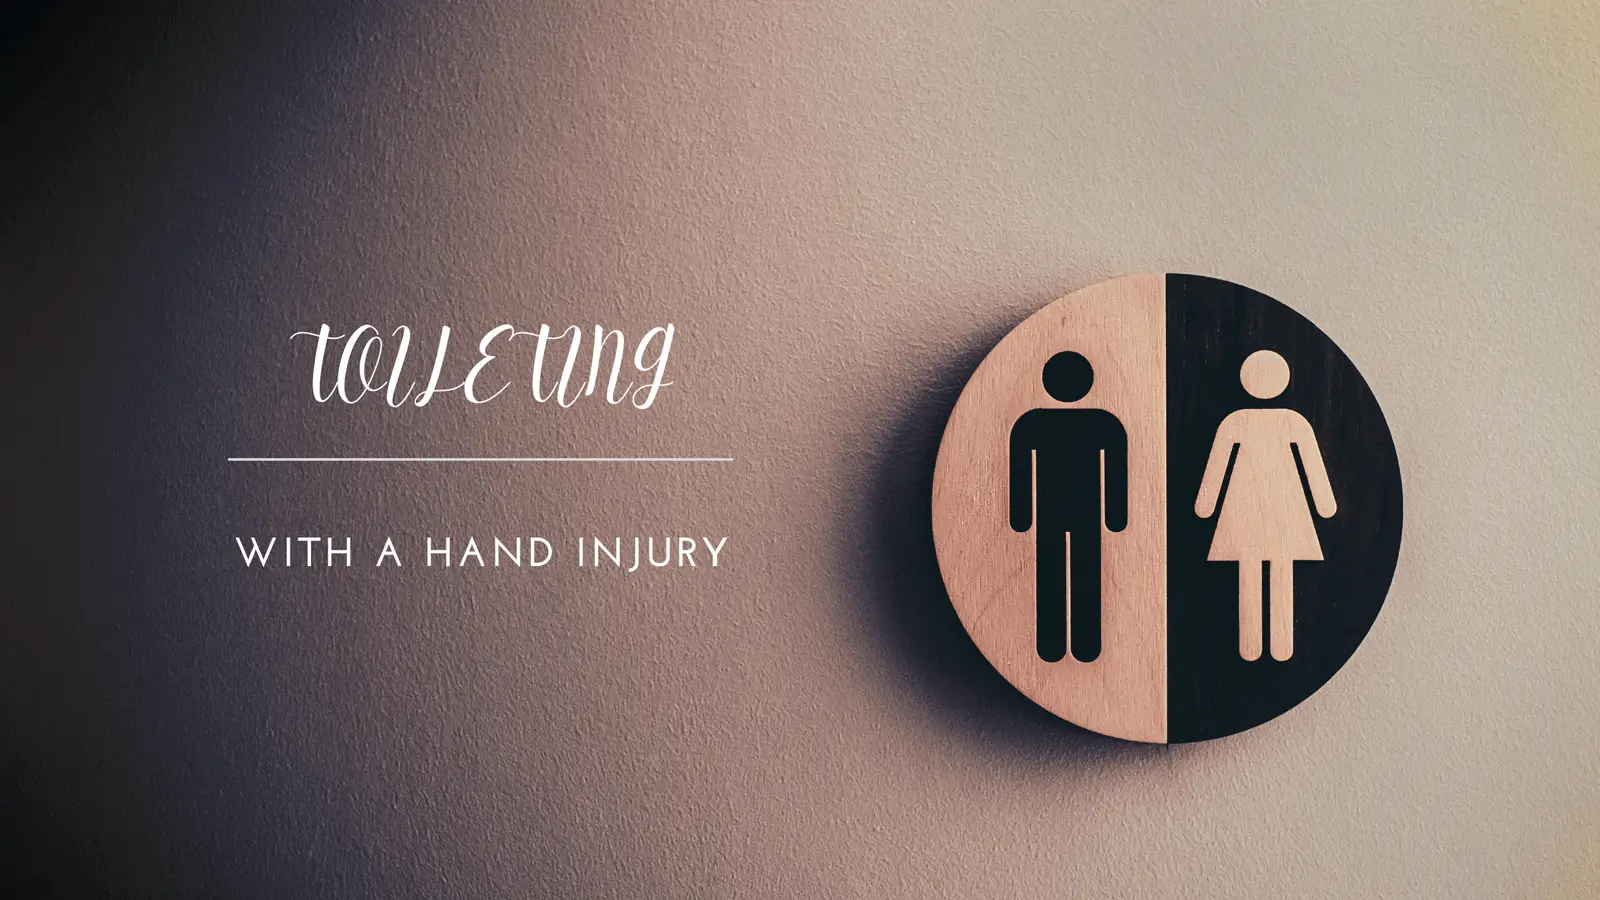 How to use the toilet after a hand injury or surgery